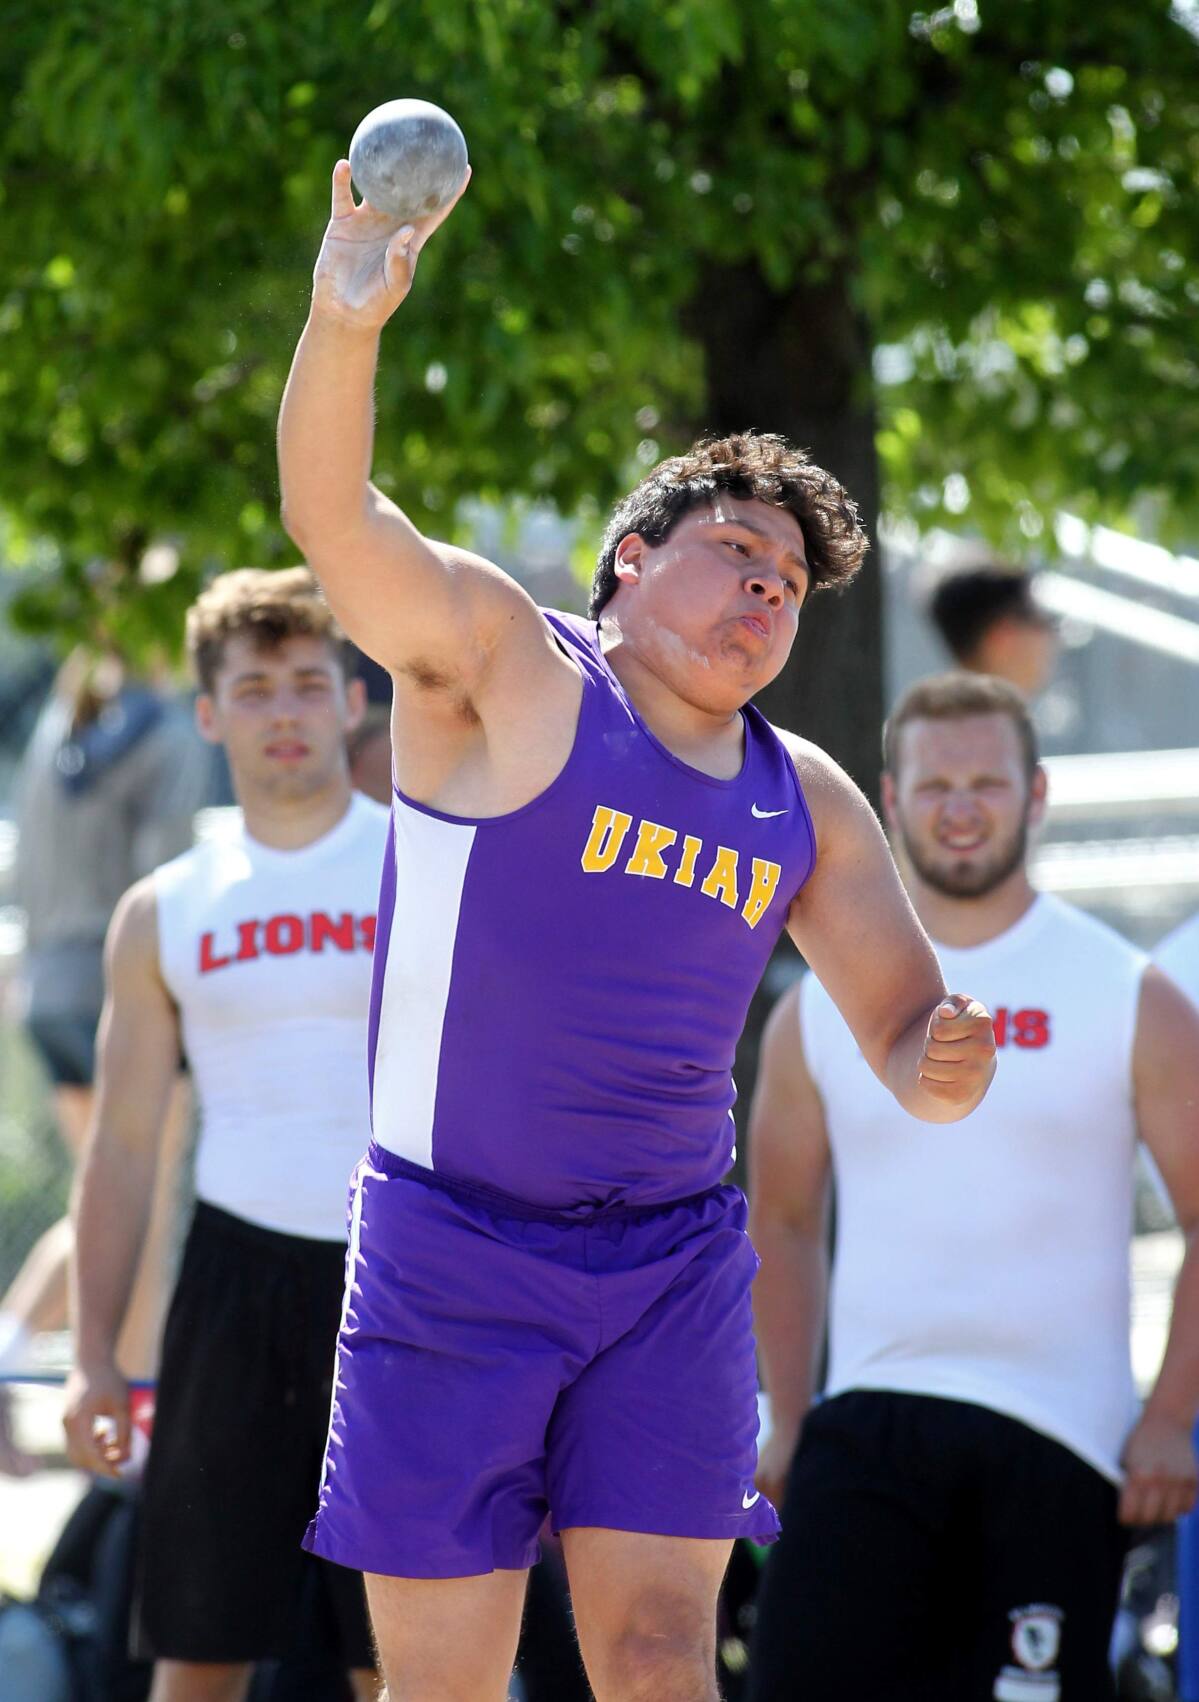 Who won the North Bay League track and field finals?